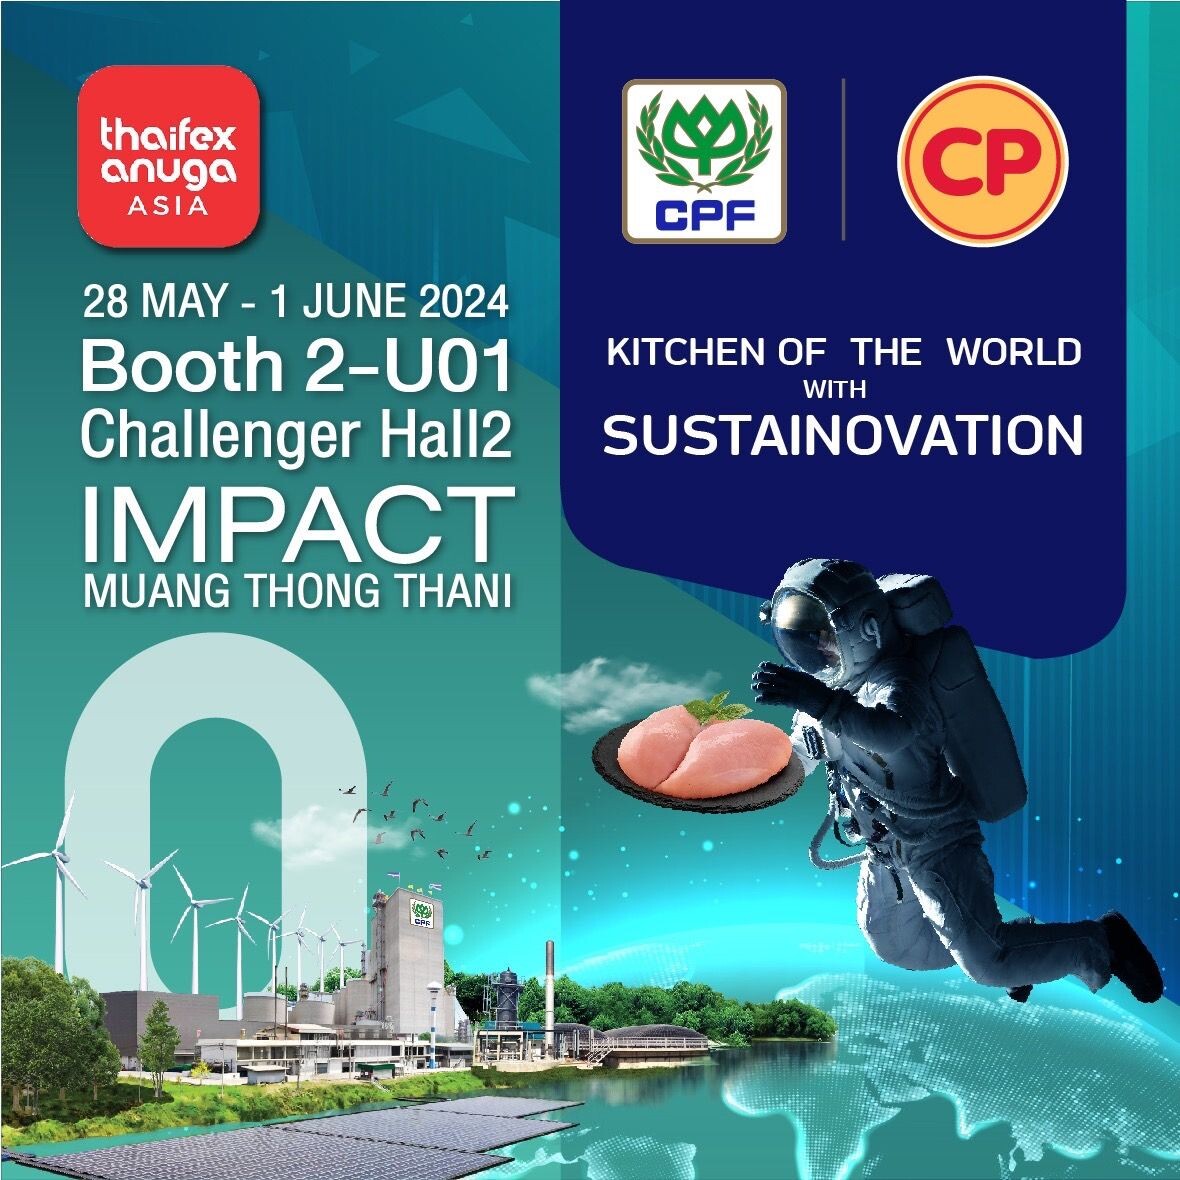 CP Foods Showcases "Kitchen of the World with Sustainovation" at THAIFEX - Anuga Asia 2024